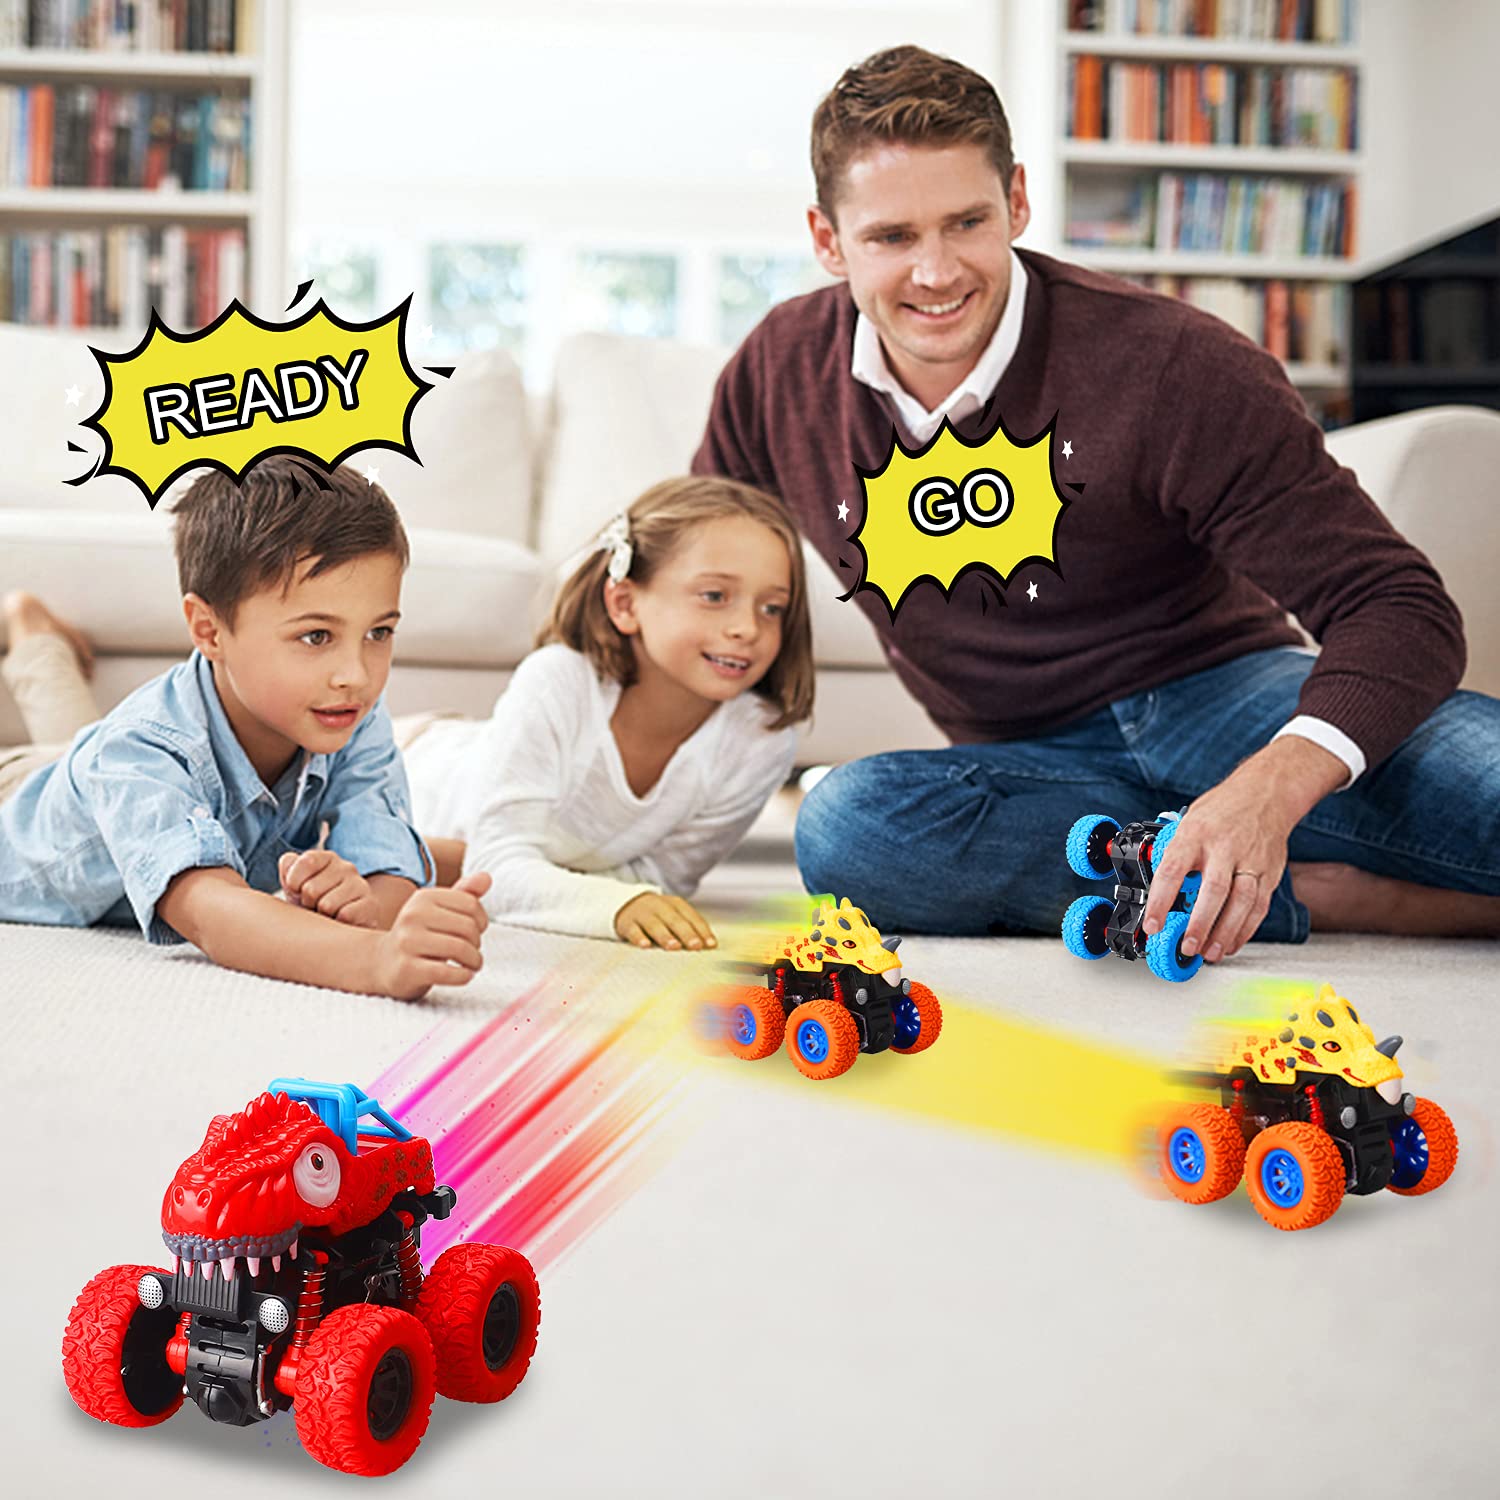 aovowog Toddler Monster Truck Toys for Boys, 4 Pack Pull Back Cars, Friction Powered Cars for Kids, Dinosaur Toys for 3 4 5 6 Year Old Boys Girls - Christmas Birthday Party Gift for Kids